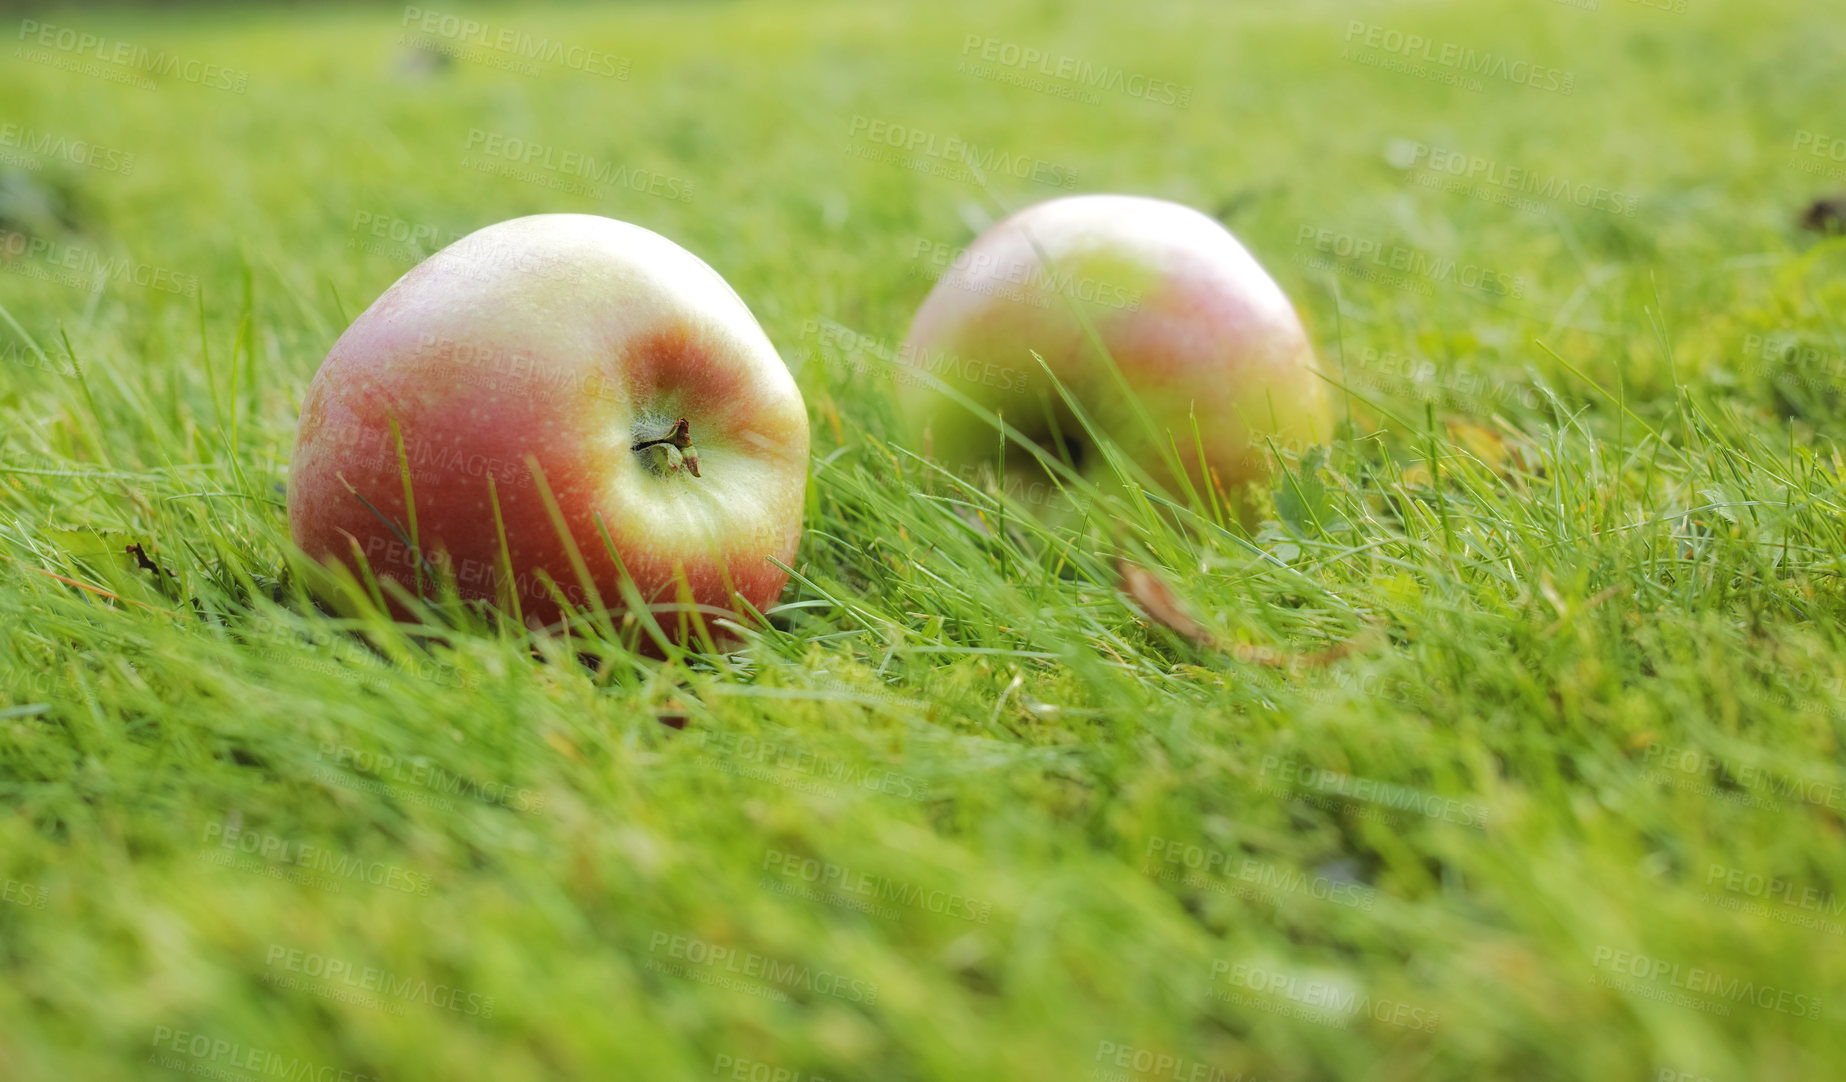 Buy stock photo Closeup of two organic apples lying in the grass on a field on a sustainable farm orchard. Healthy agricultural vegan fruit or produce, ripe and ready for fruitarianism during the harvest season